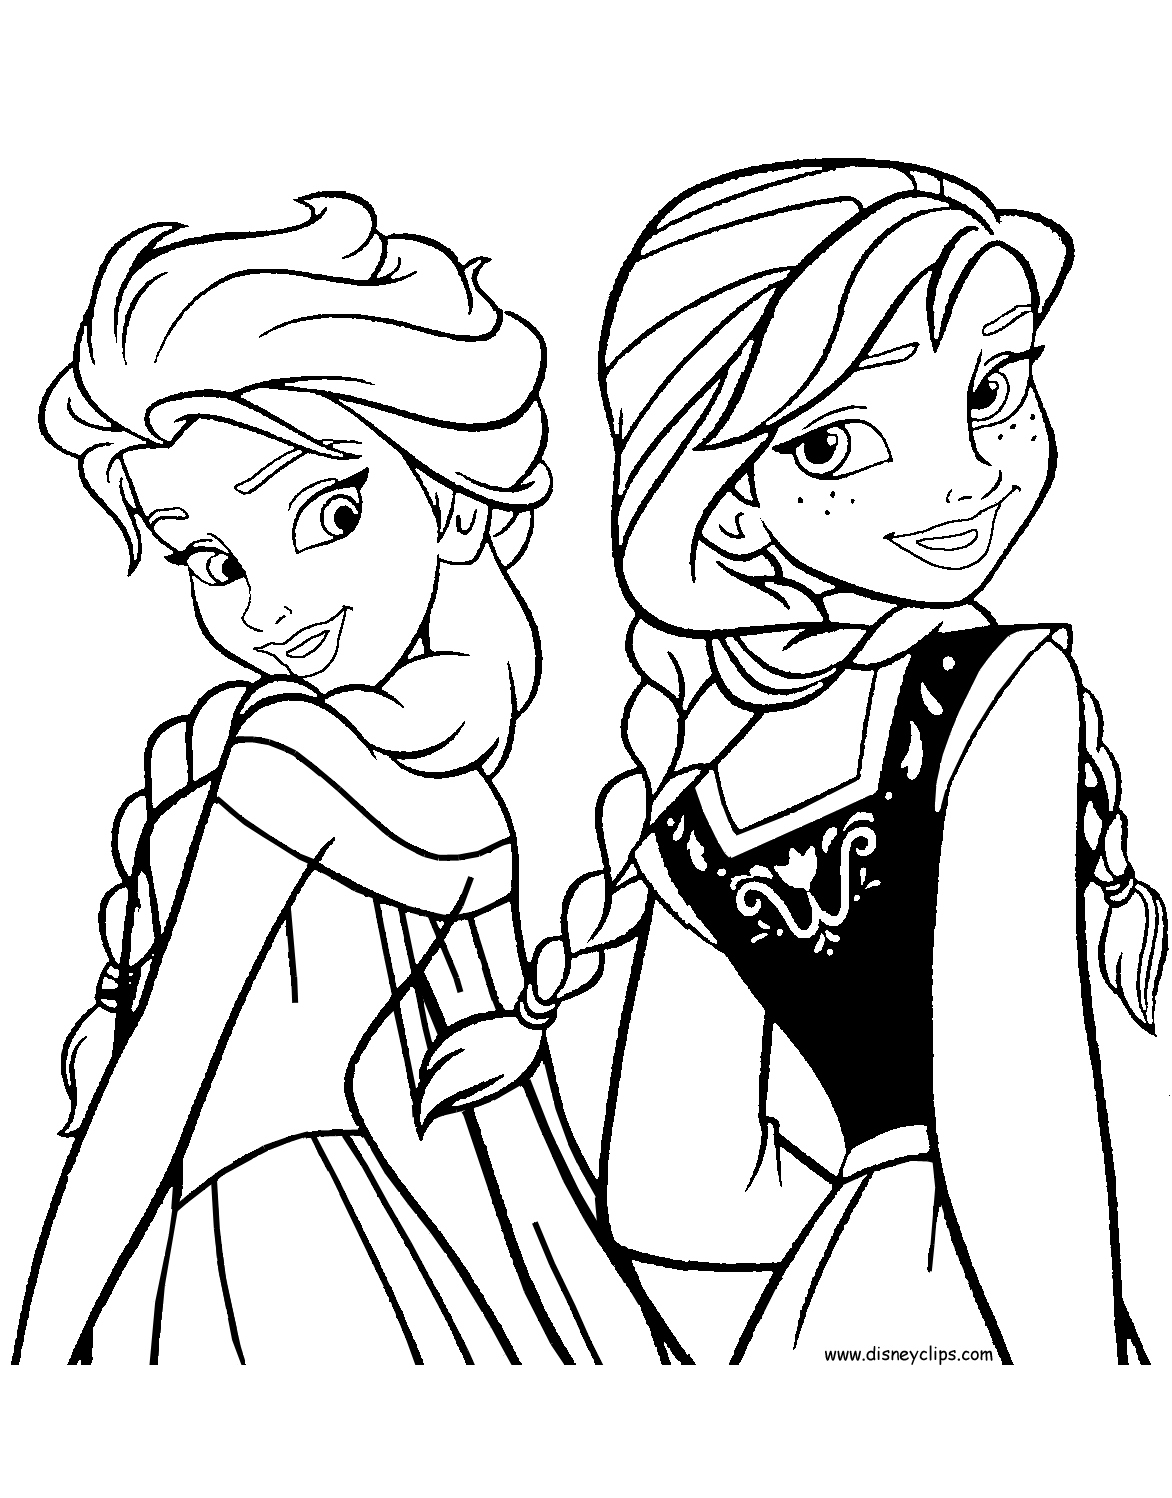 Disney Frozen Printable Coloring Pages at Free